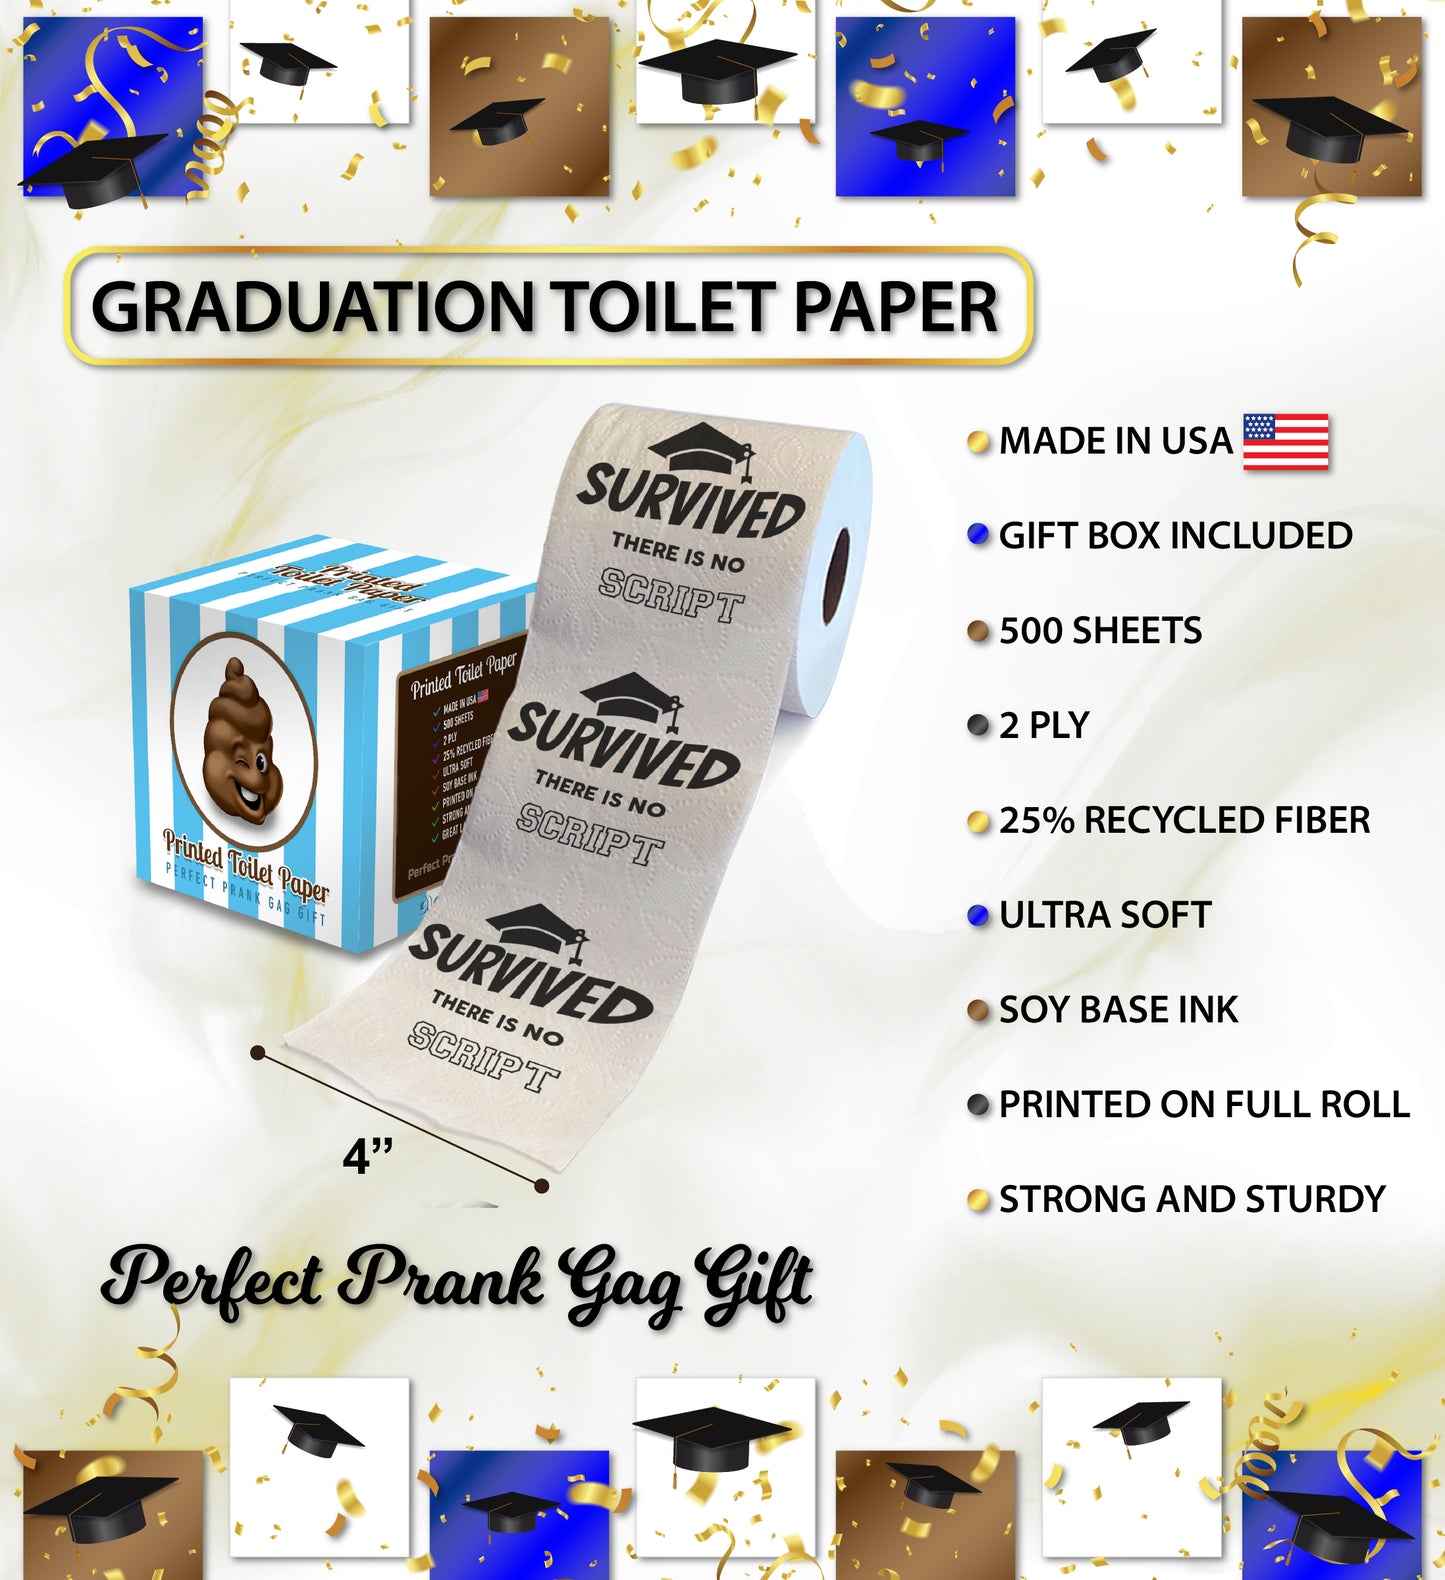 Printed TP Survived There is No Script Printed Toilet Paper Gift, 500 Sheets